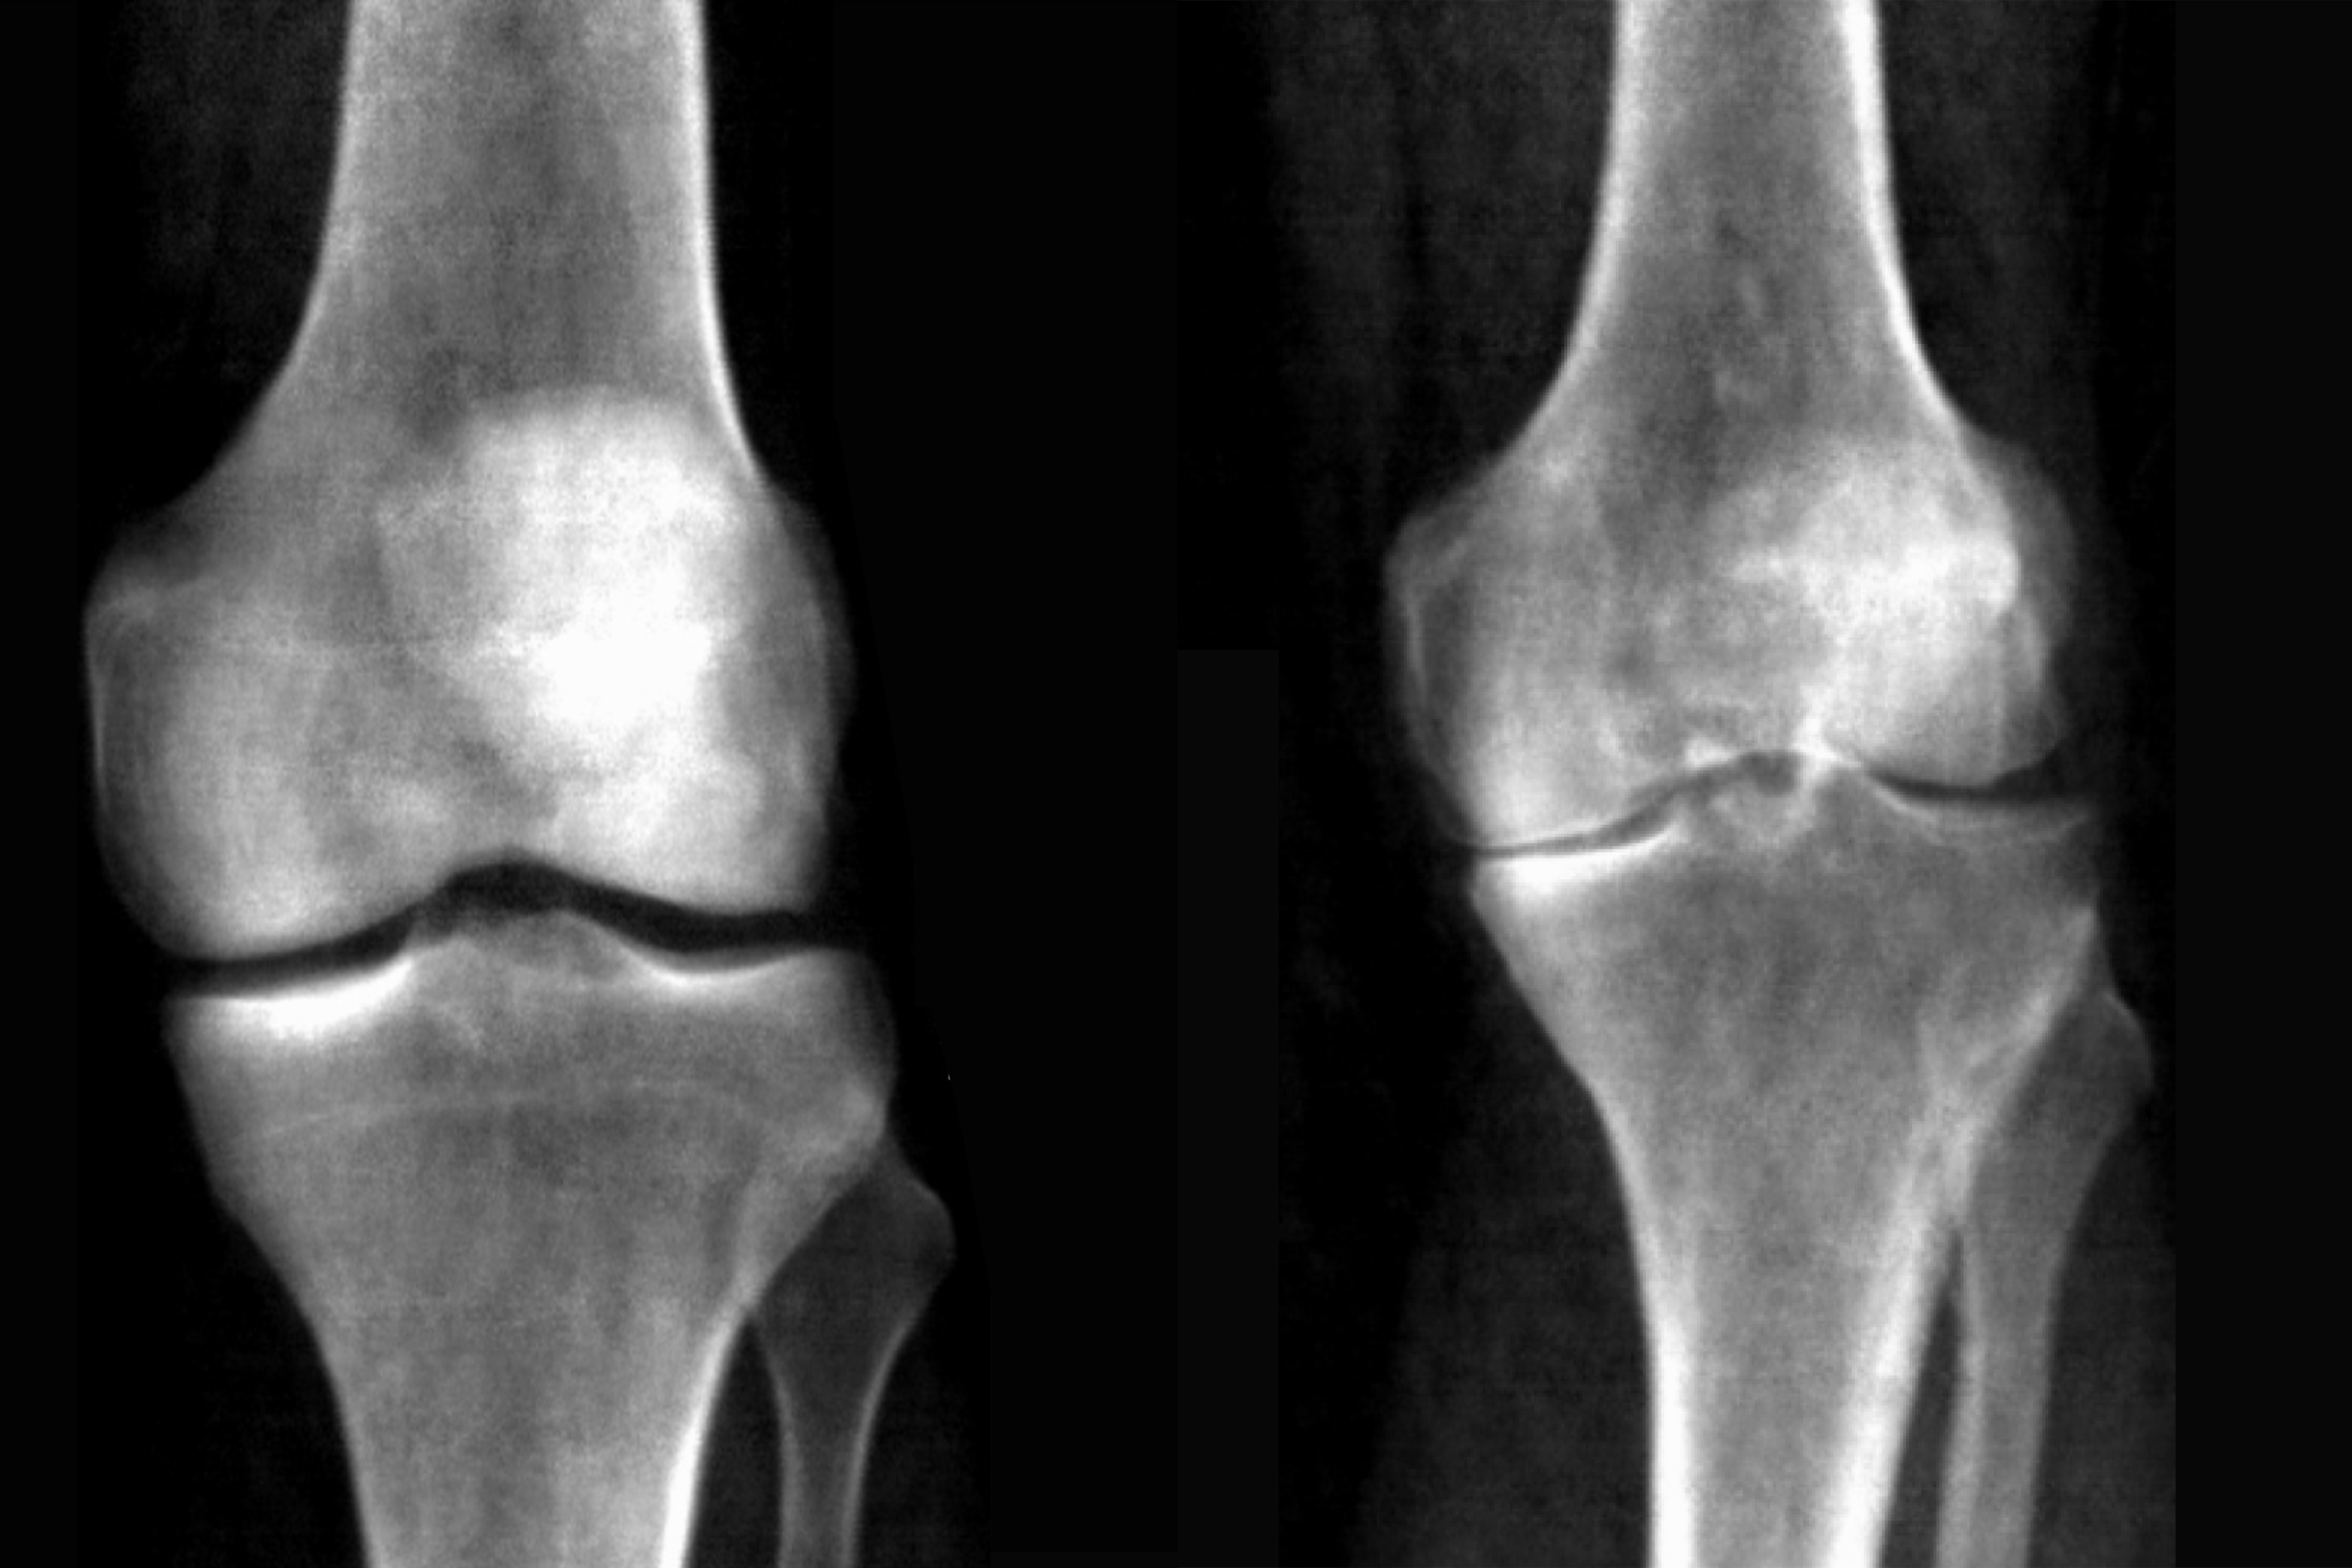 Two x-rays of knees